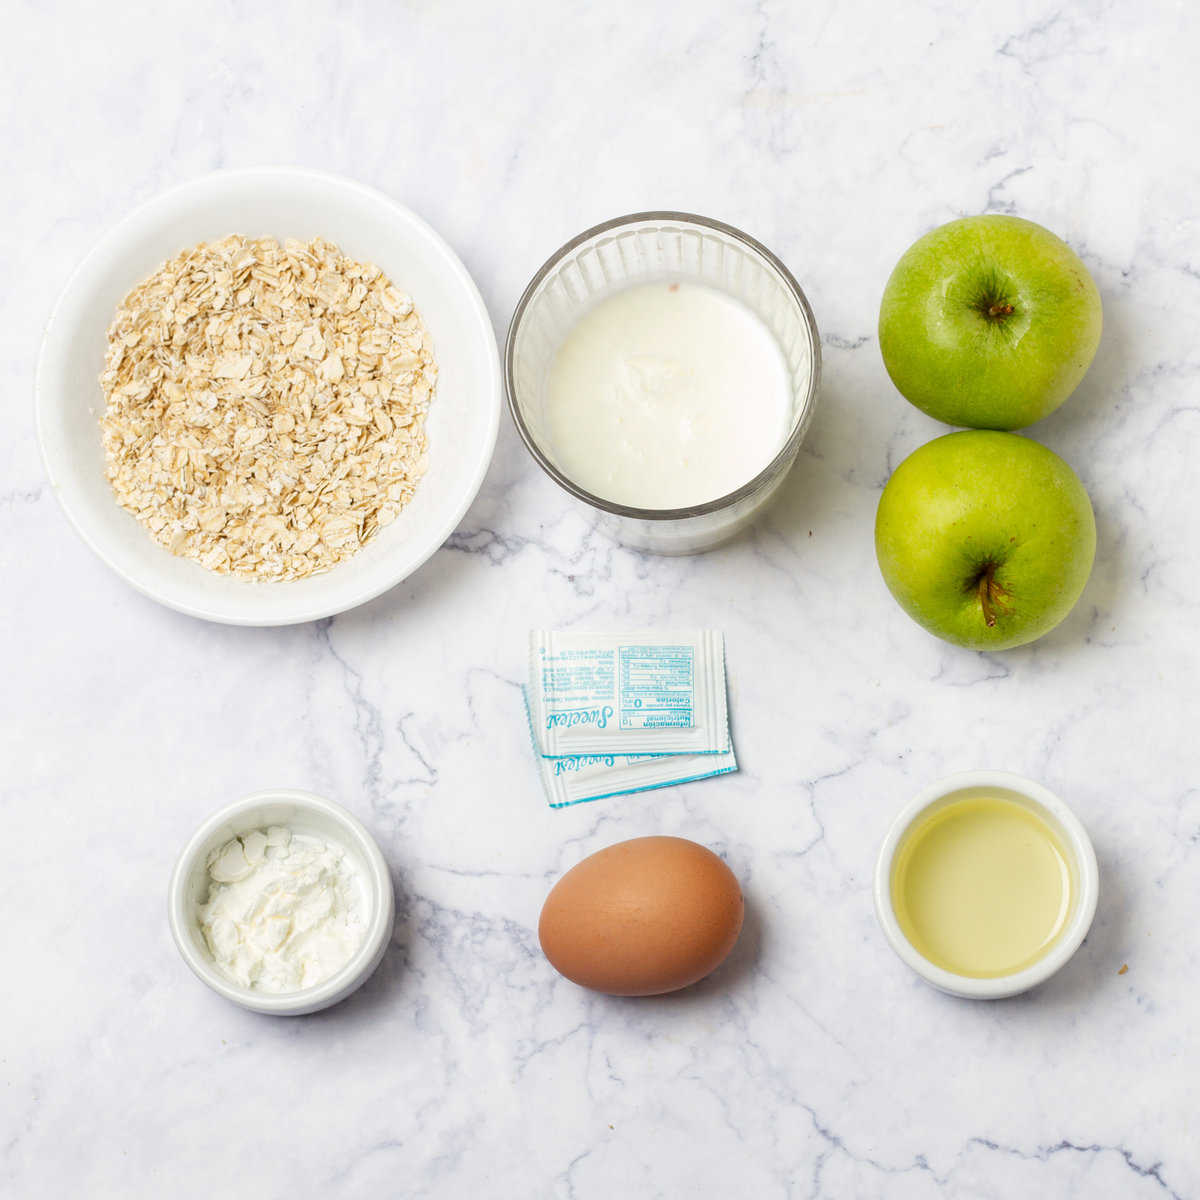 Oats, milk, apples, egg, baking powder and spices in separate dishes. 